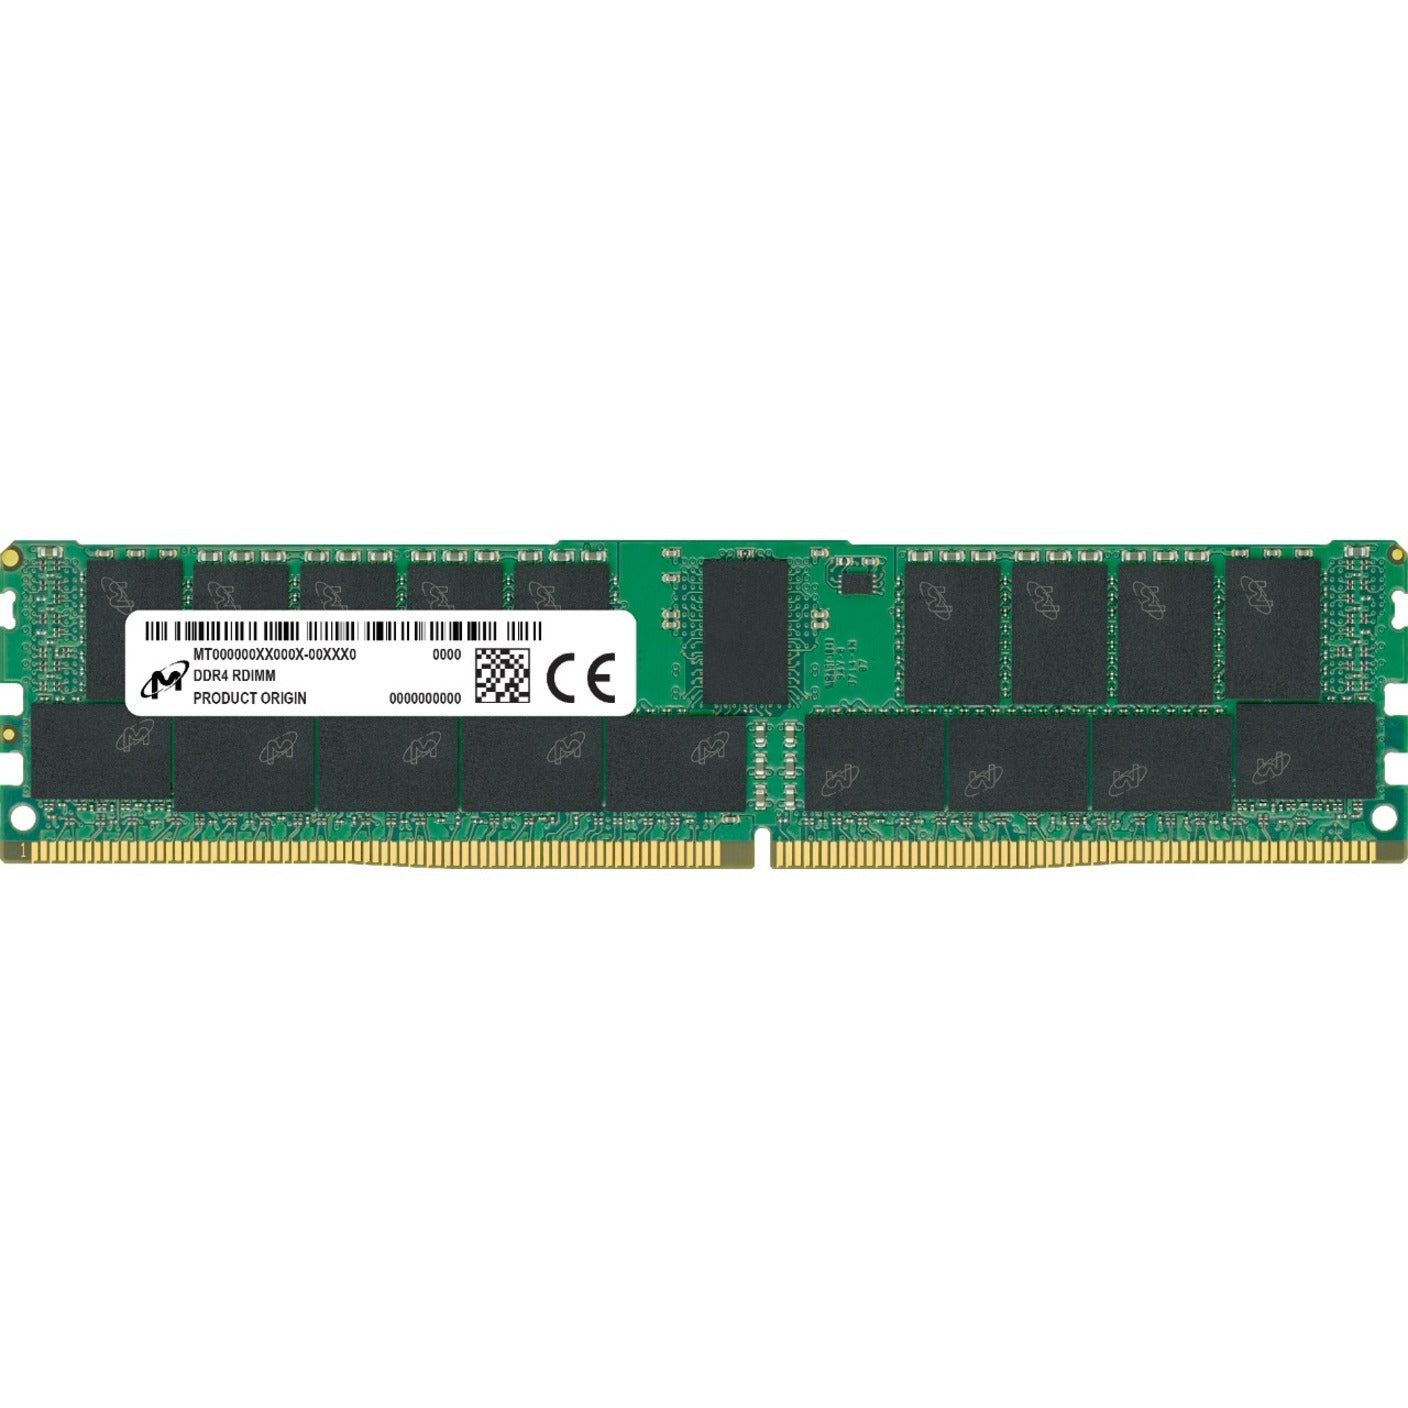 Micron MTA36ASF4G72PZ-2G9J3 32GB DDR4 SDRAM Memory Module, High Performance RAM for Servers, Workstations, and Motherboards